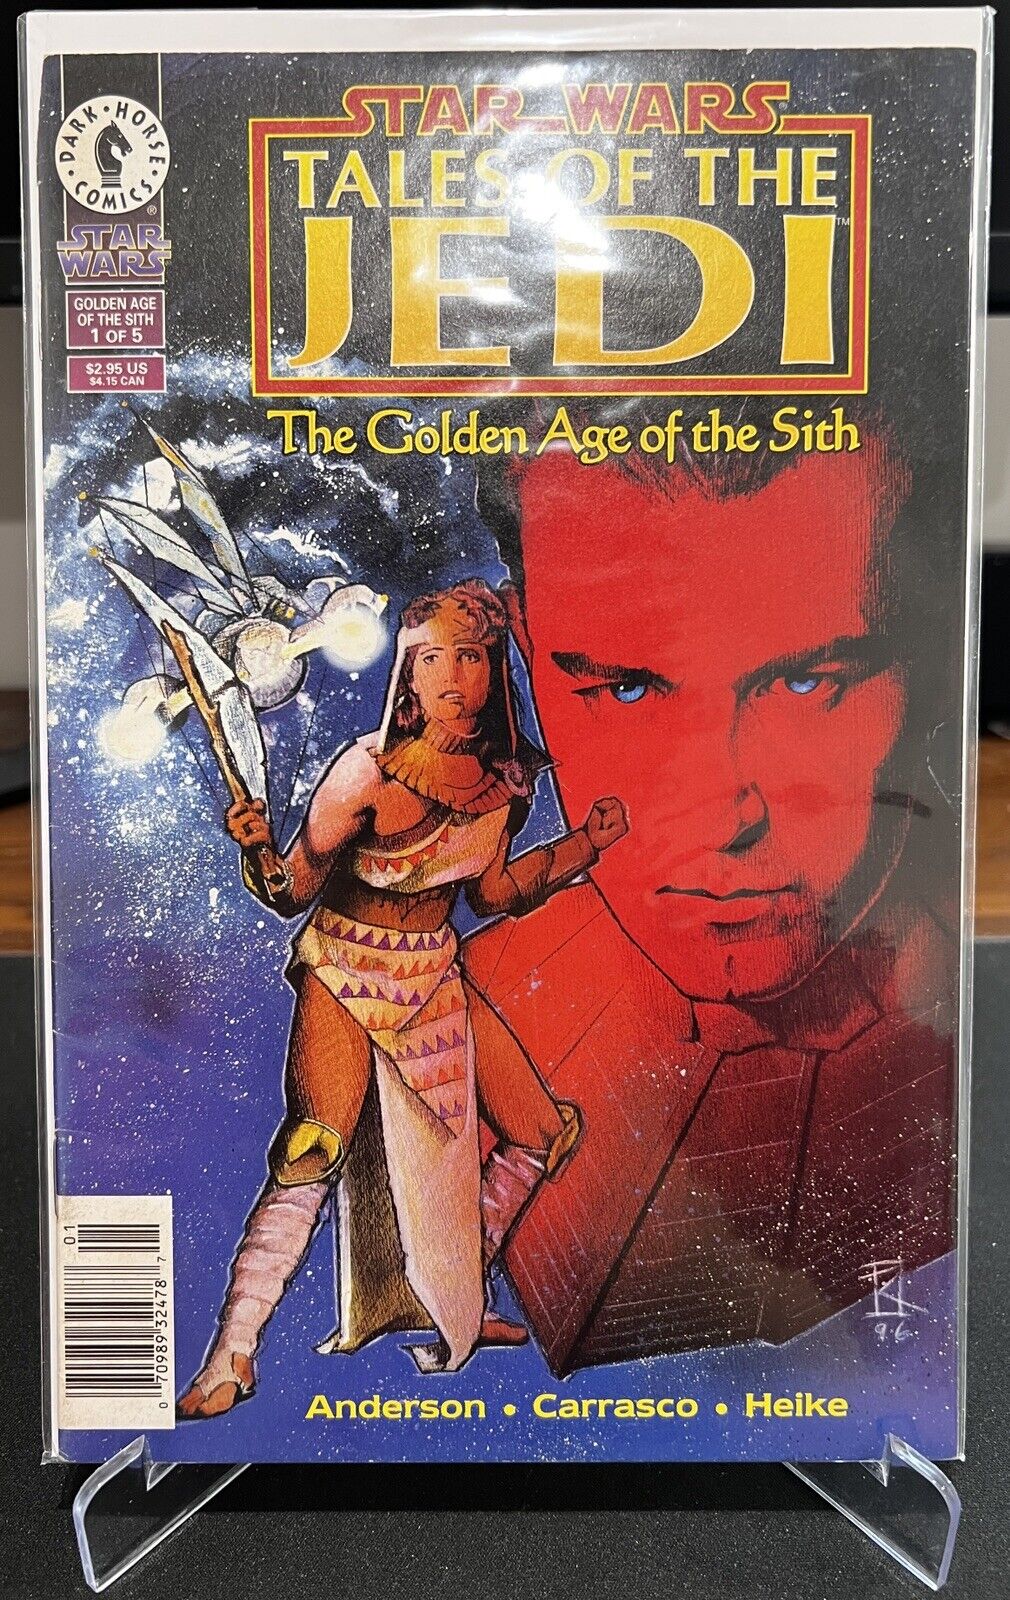 STAR WARS TALES OF THE JEDI: Golden Age of the Sith #1 (1996) *NEWSSTAND* FN-